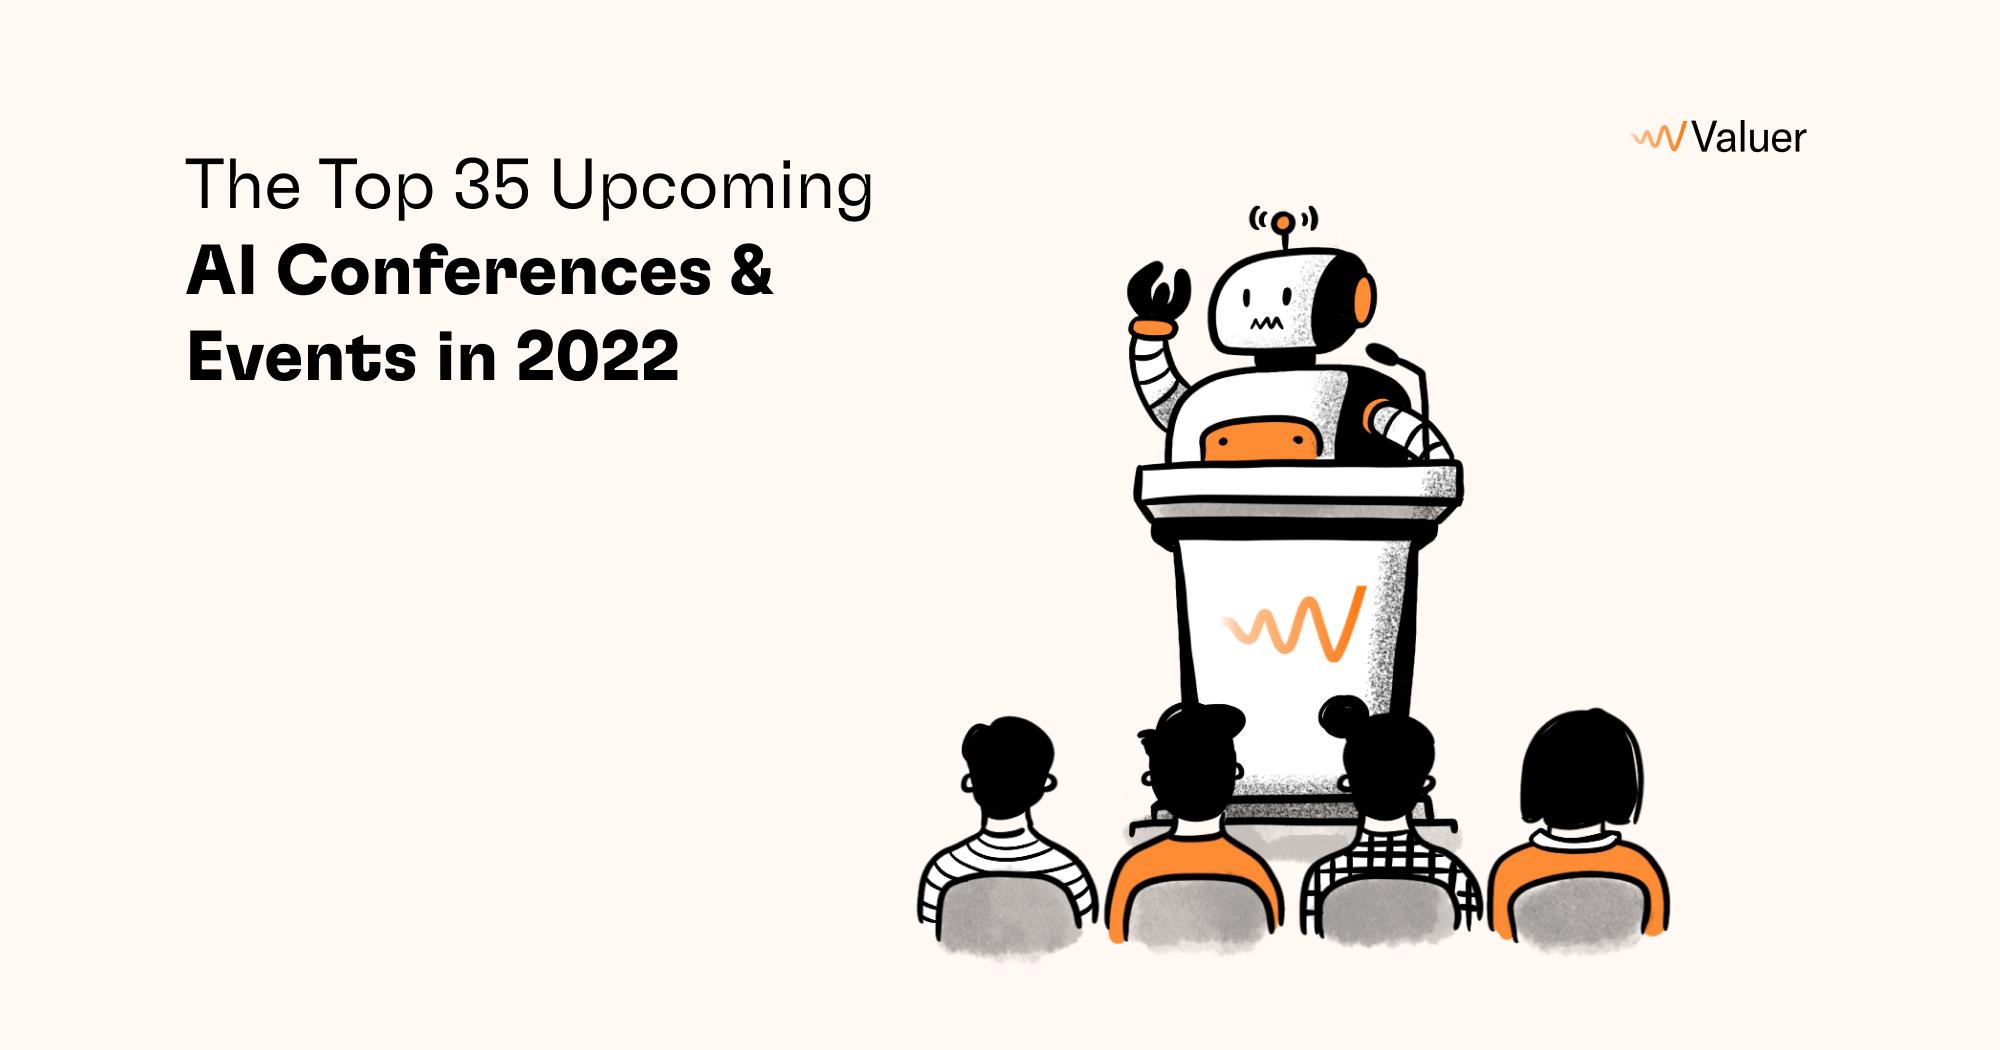 The Top 35 Upcoming AI Conferences & Events in 2022